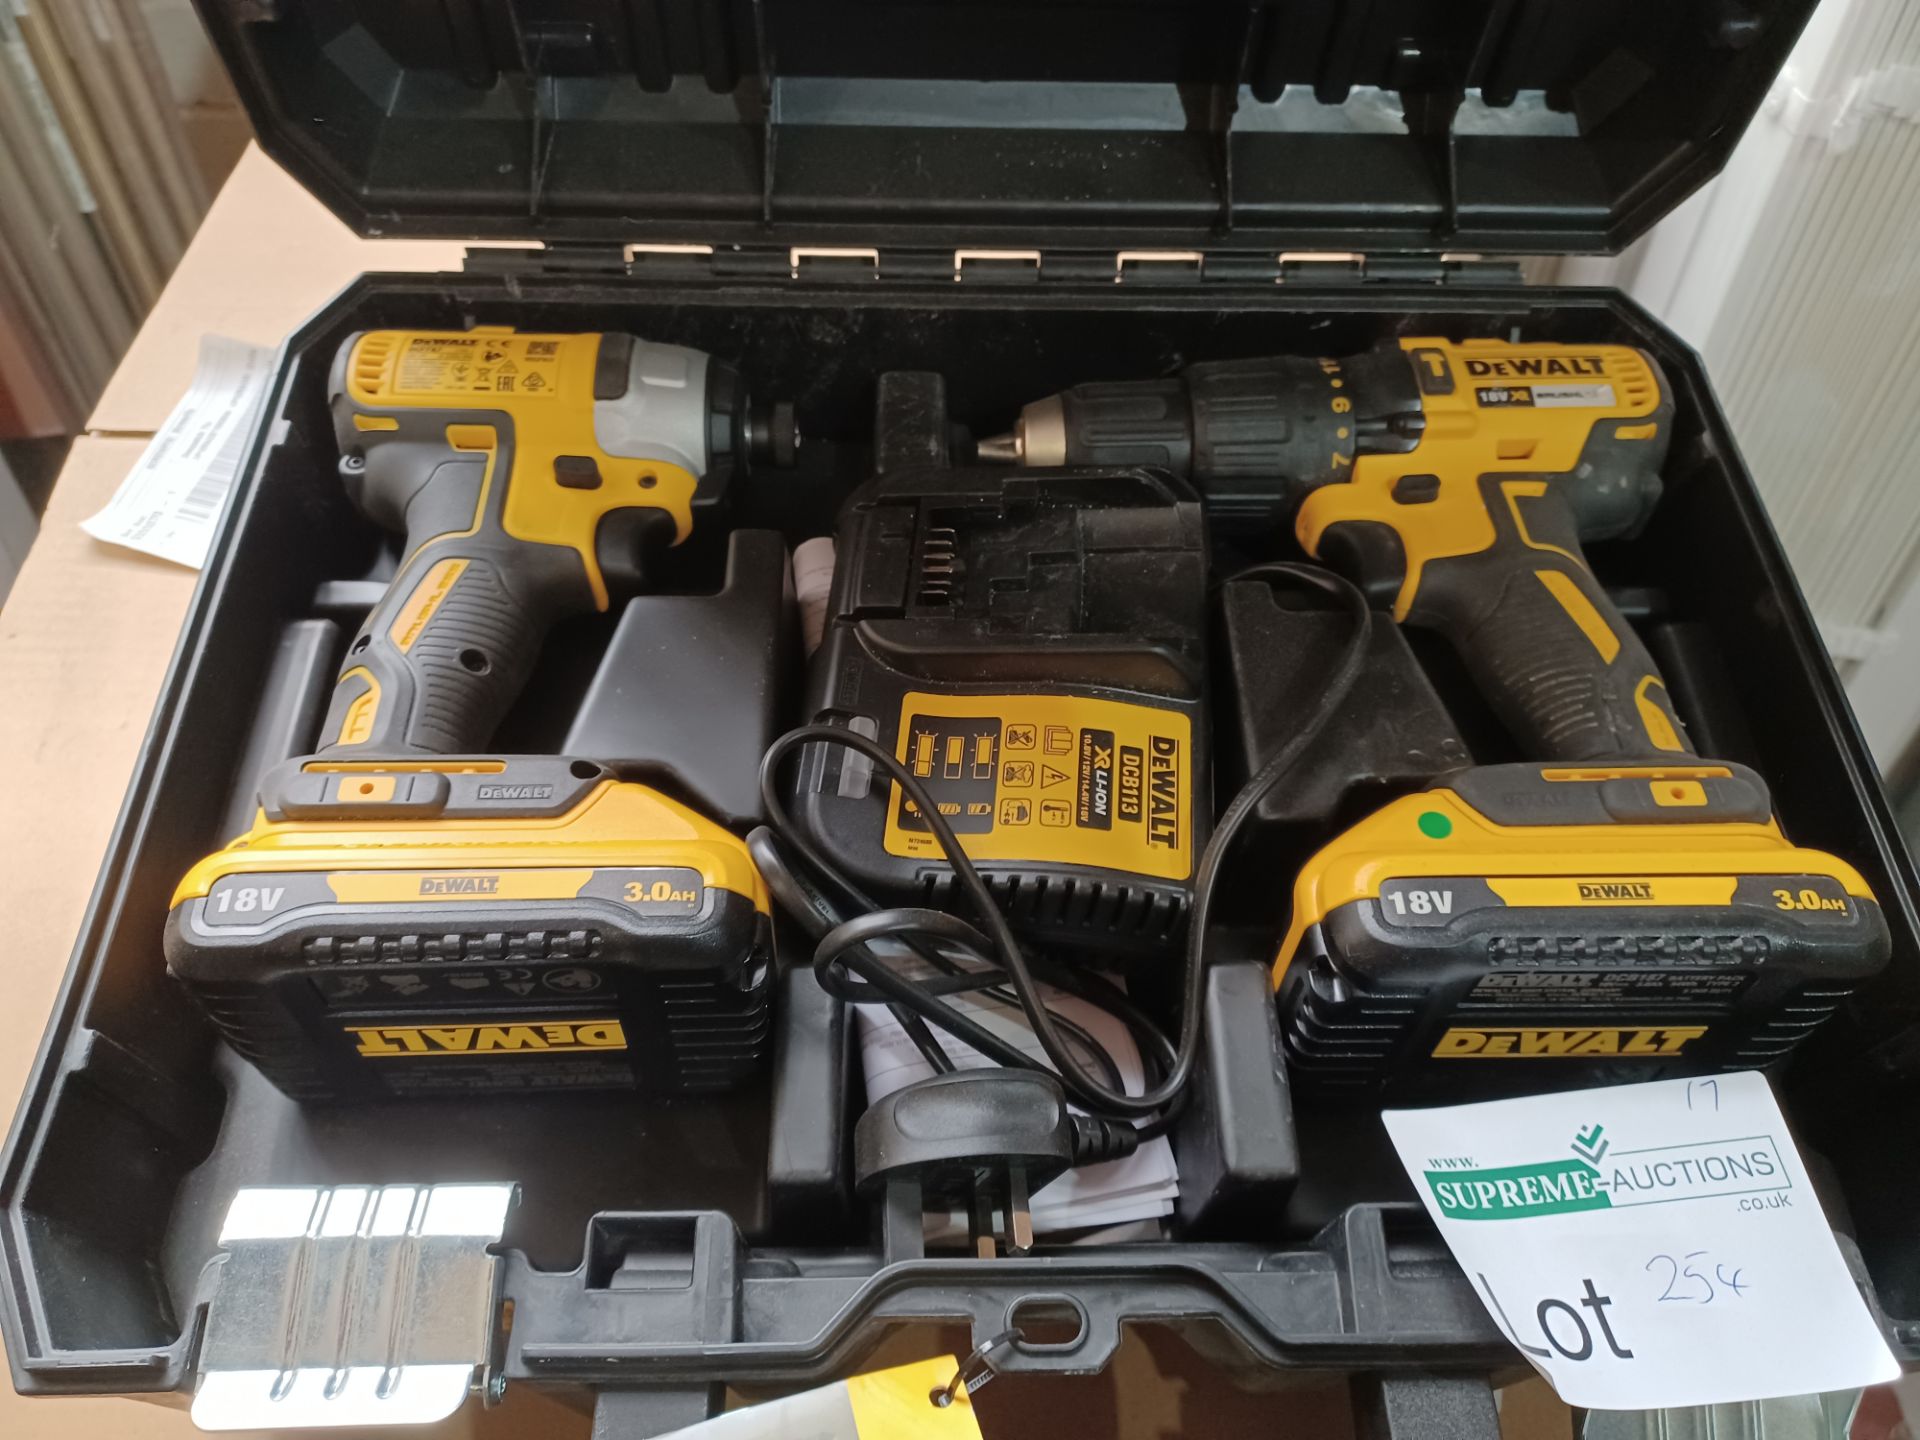 DEWALT DCK2060L2T-SFGB 18V 3.0AH LI-ION XR BRUSHLESS CORDLESS TWIN PACK WITH 2 BATTERIES CHARGER AND